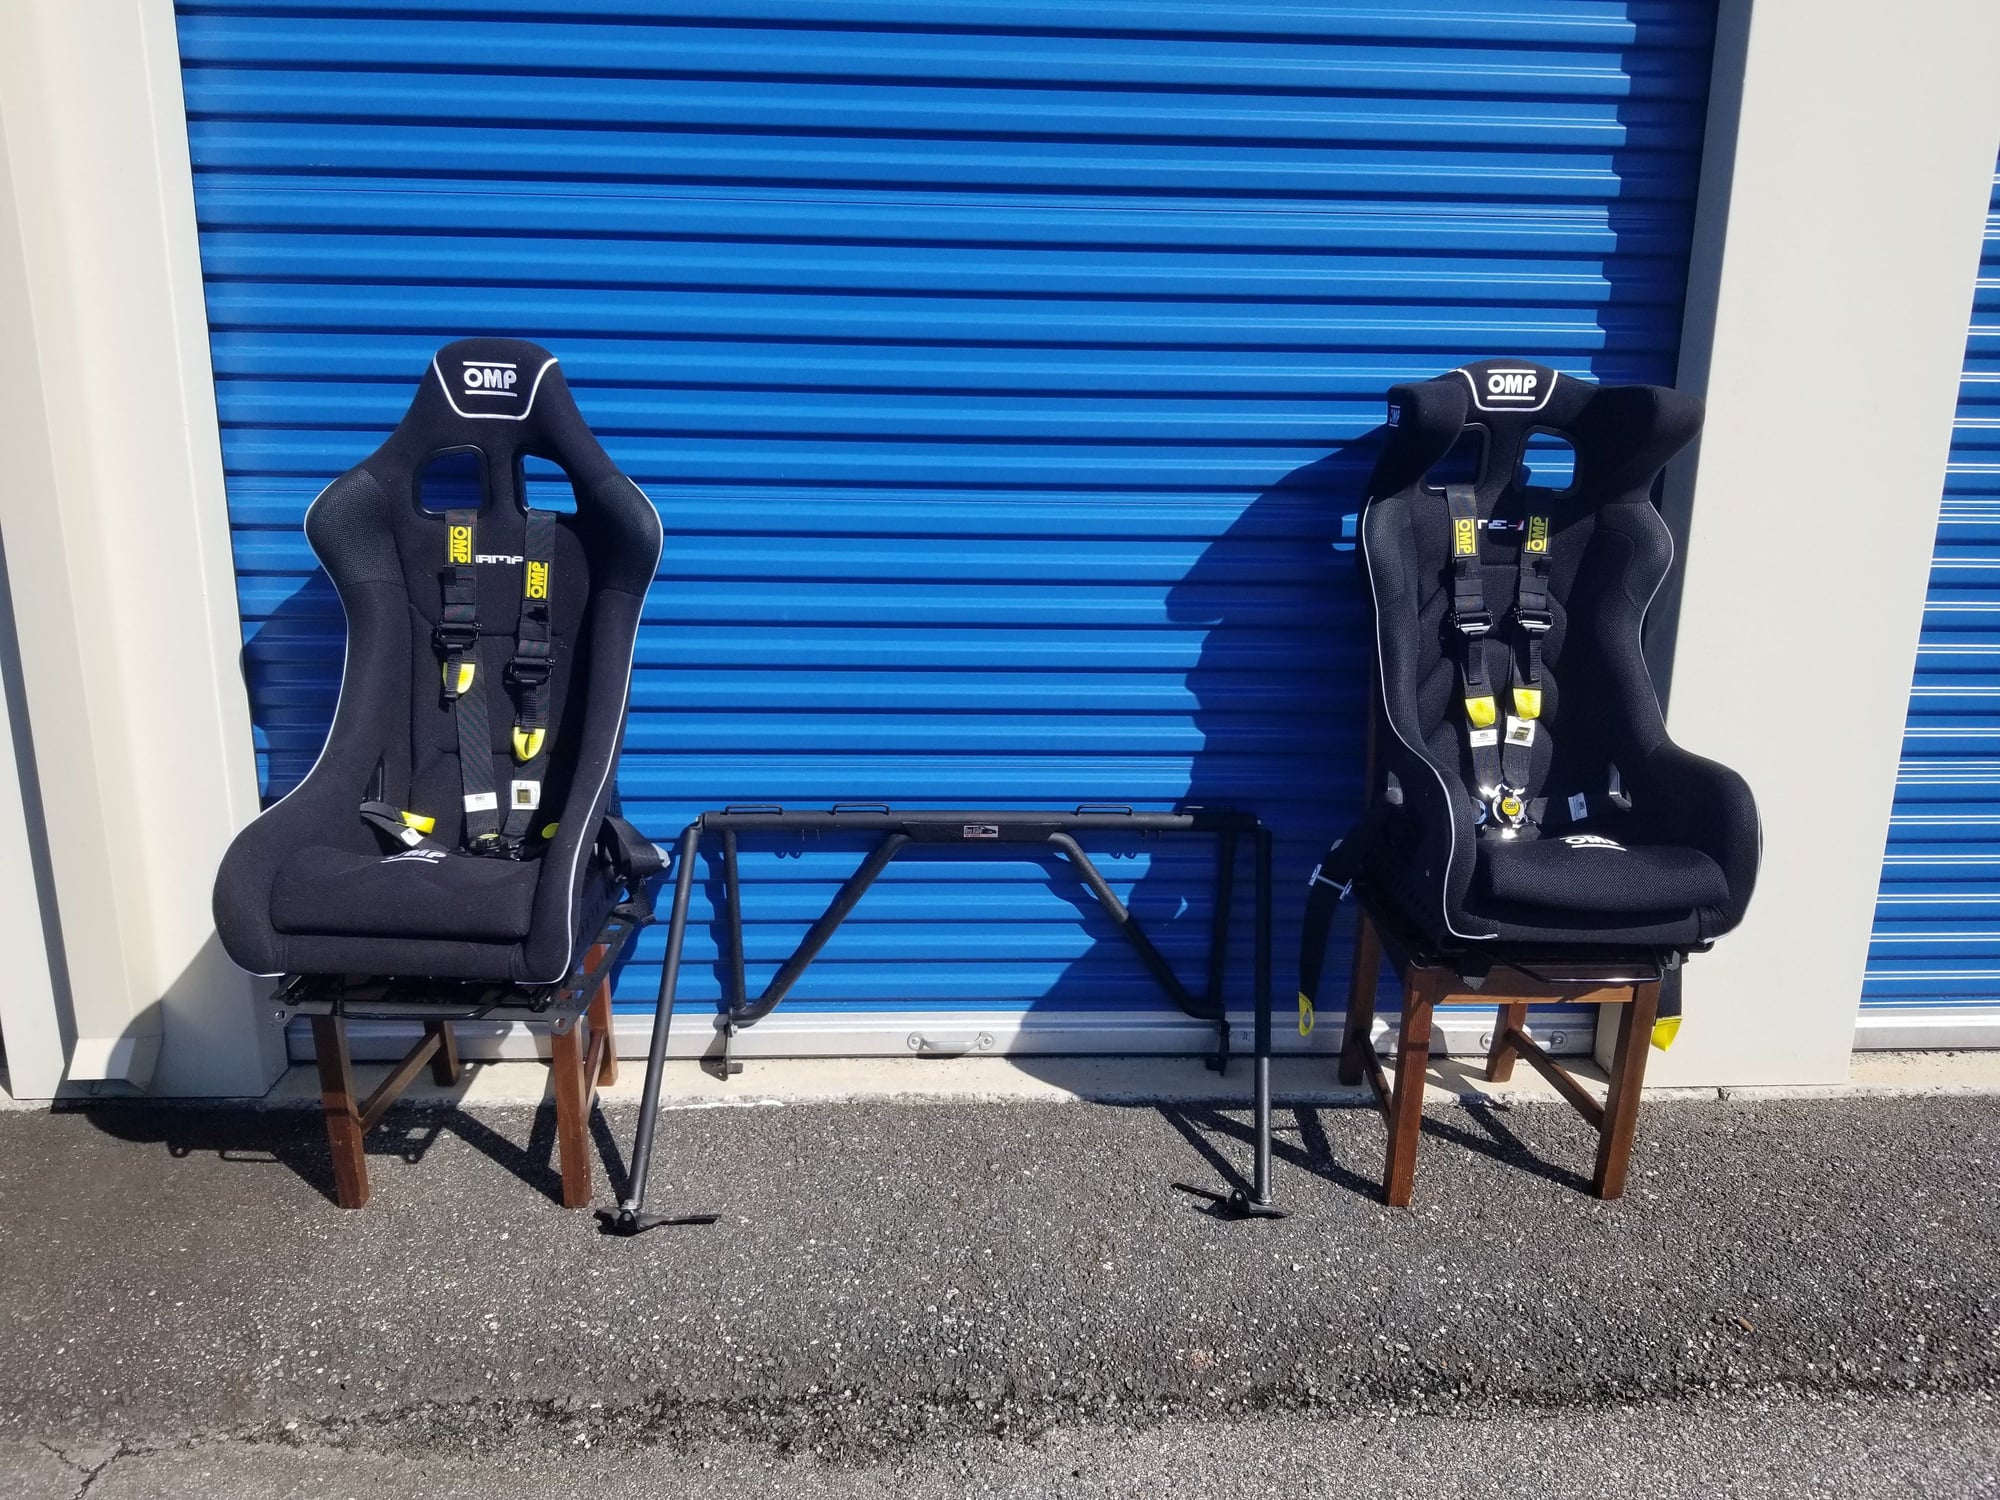 Interior/Upholstery - *NEW* Full 996, 997, 987 OMP Racing Seat & Harness Set Up on sliders w/Brey-Krause - New - 2004 to 2011 Porsche 911 - 2006 to 2012 Porsche Cayman - Chesapeake, VA 23321, United States